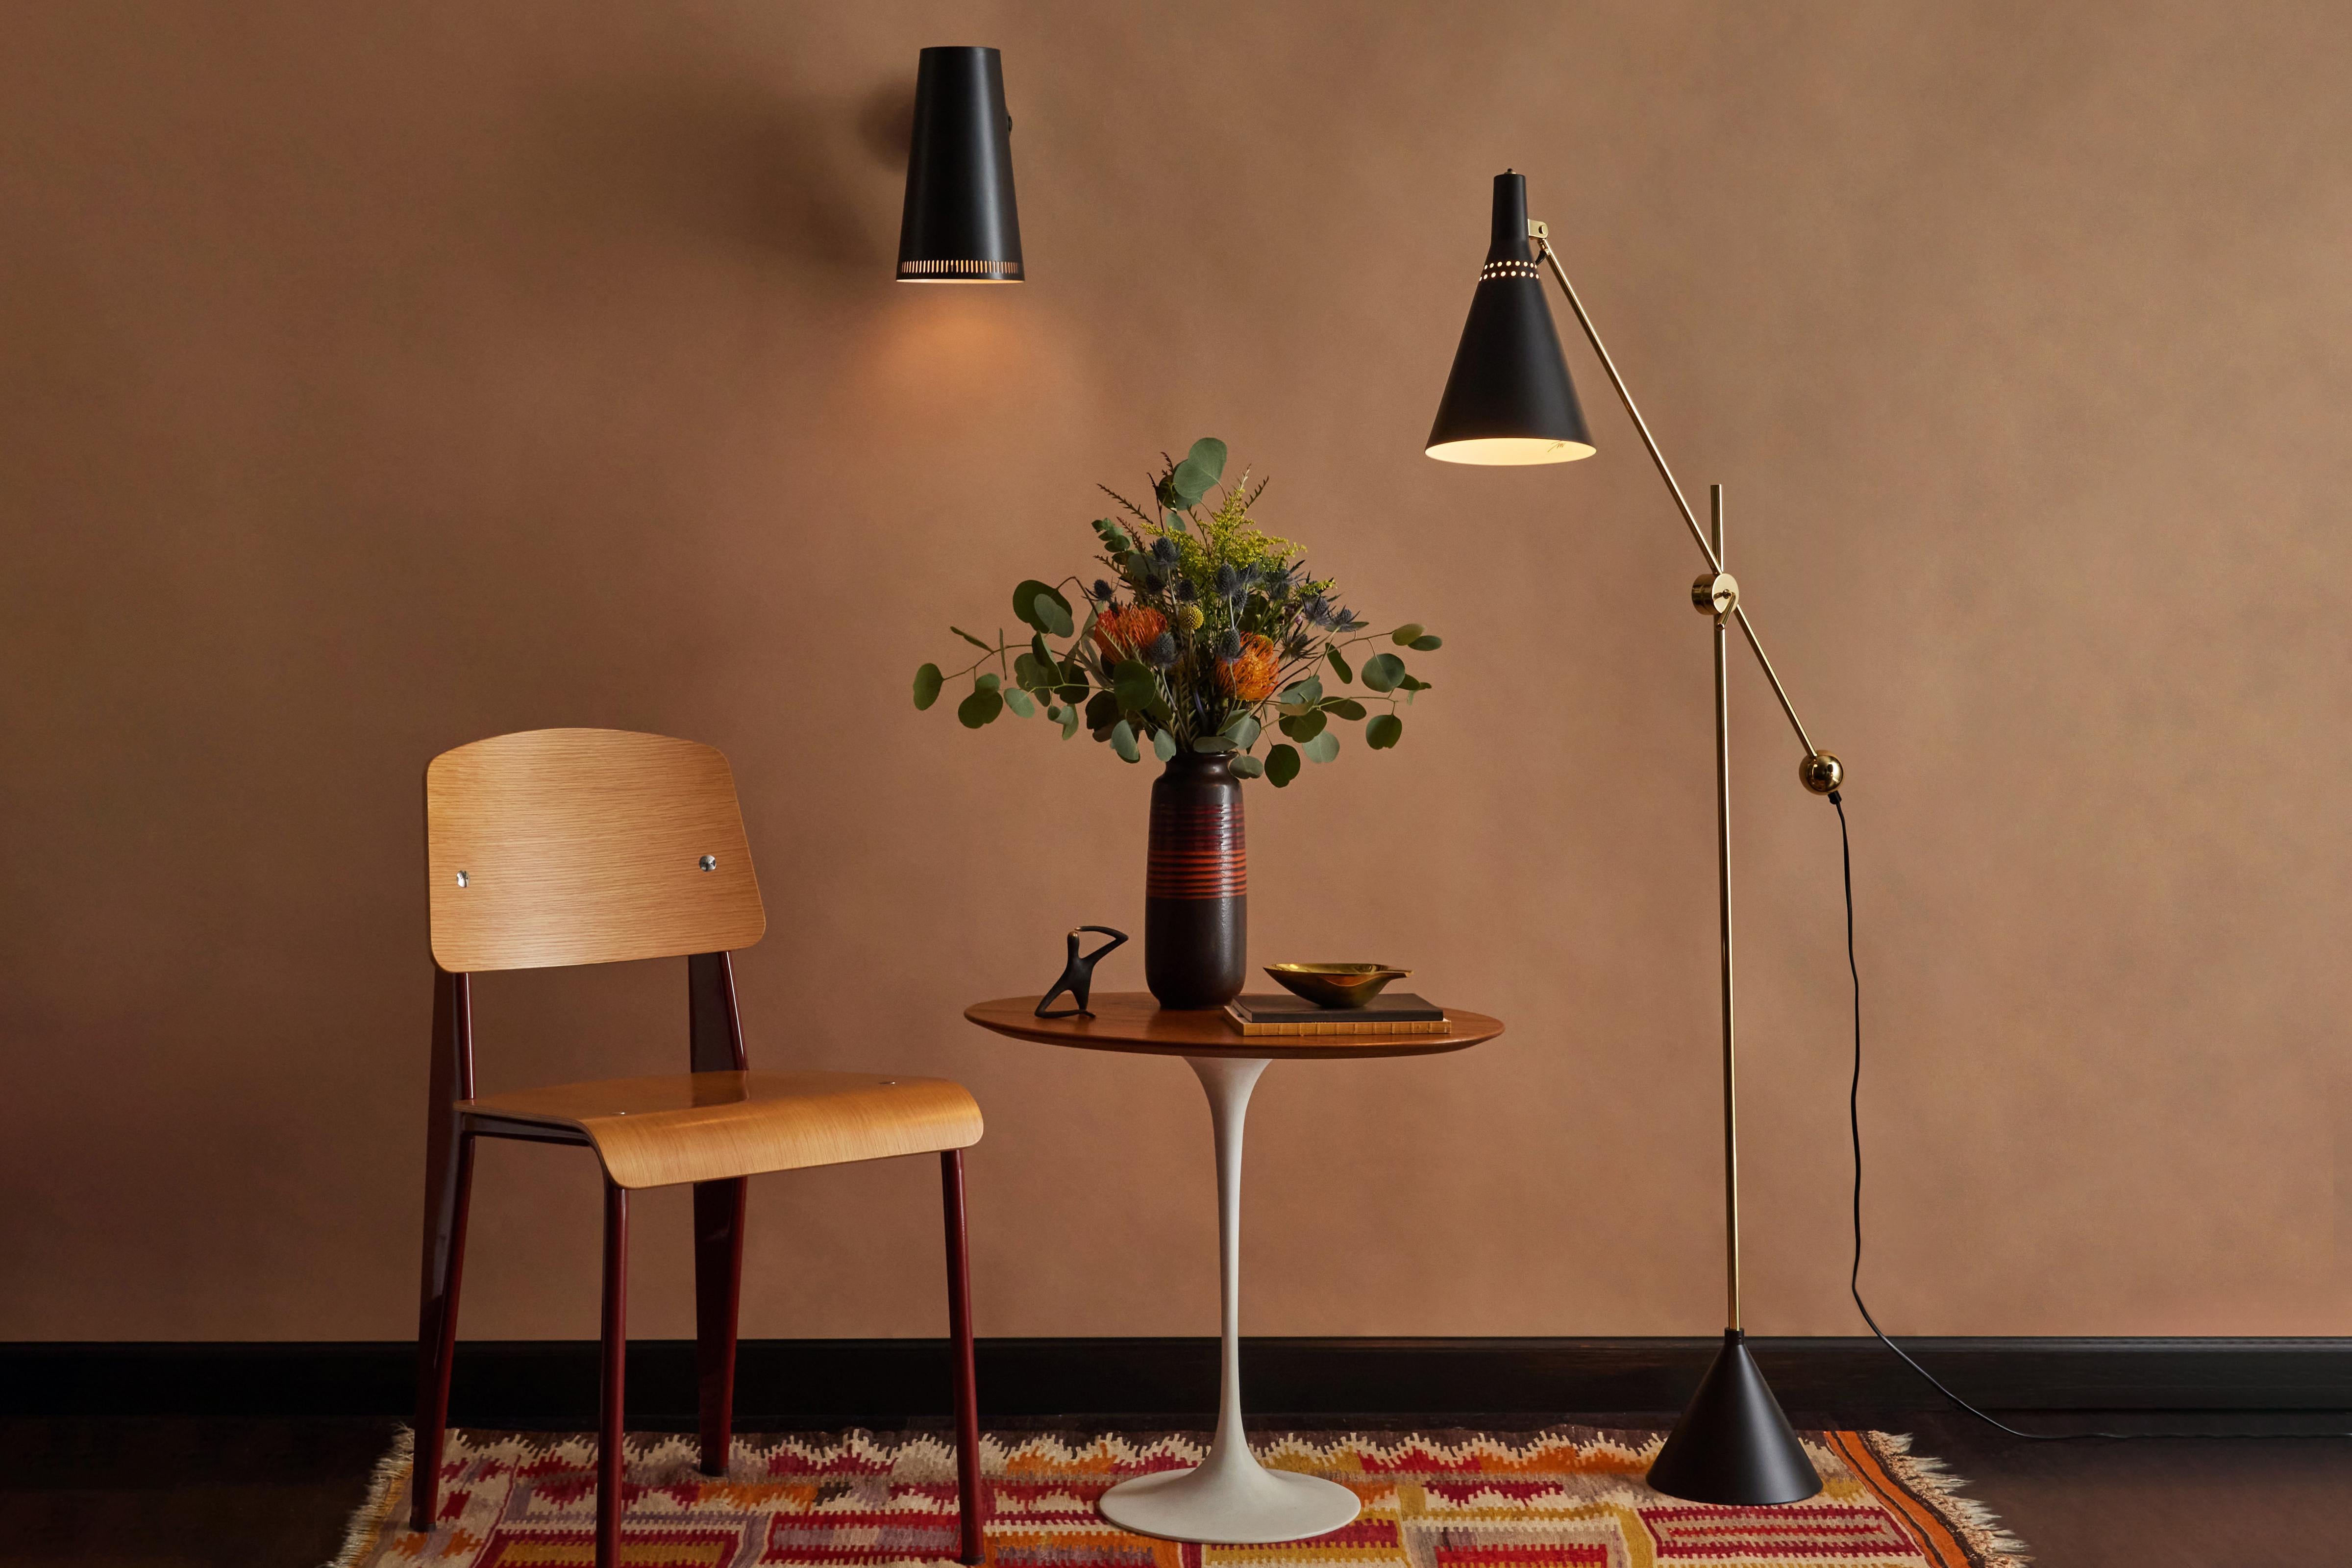 Tapio Wirkkala 'Crane' Articulating Floor Lamp in Black for Innolux Oy. Originally produced as the in the 1950s as the Model #K-10-11 by Idman, this newly authorized re-edition of the iconic lamp is made by Innolux Oy of Finland with the same